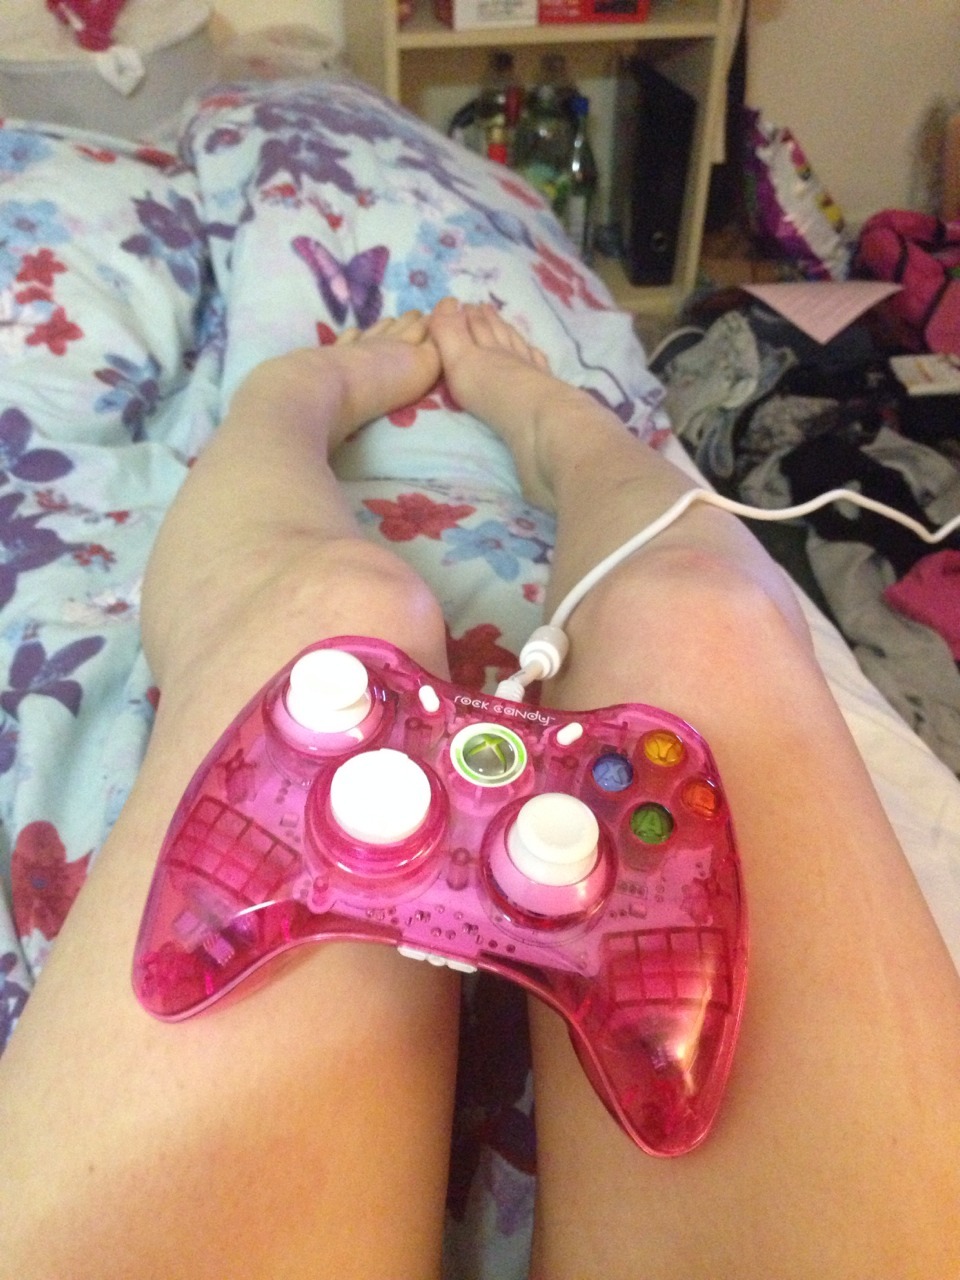 yay new controller reaches perfectly for gta in bed 👌💕